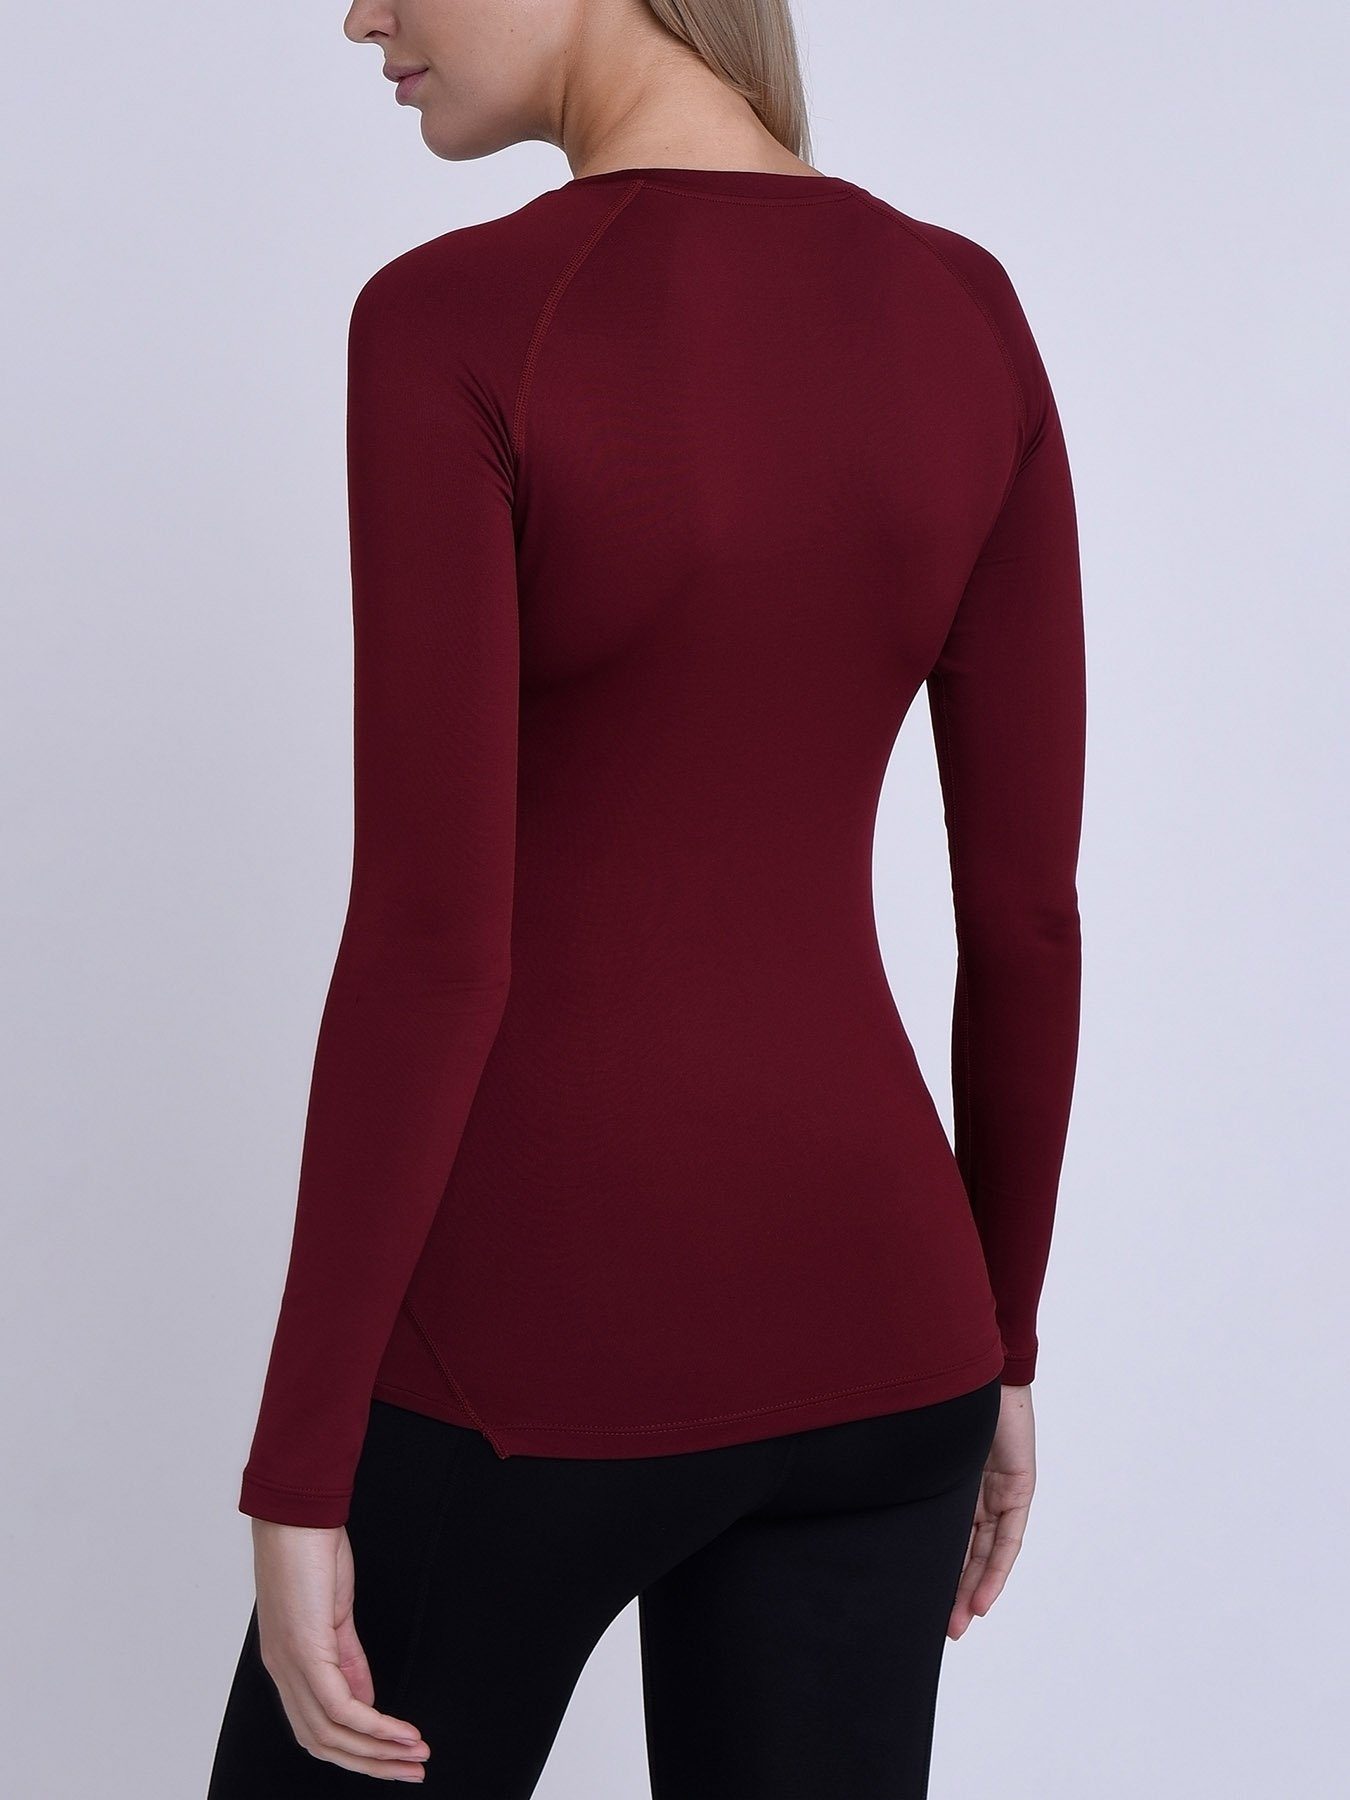 Ladies Women Thermal Underwear Long Sleeved T Shirt Fully Brushed Good  Quality 